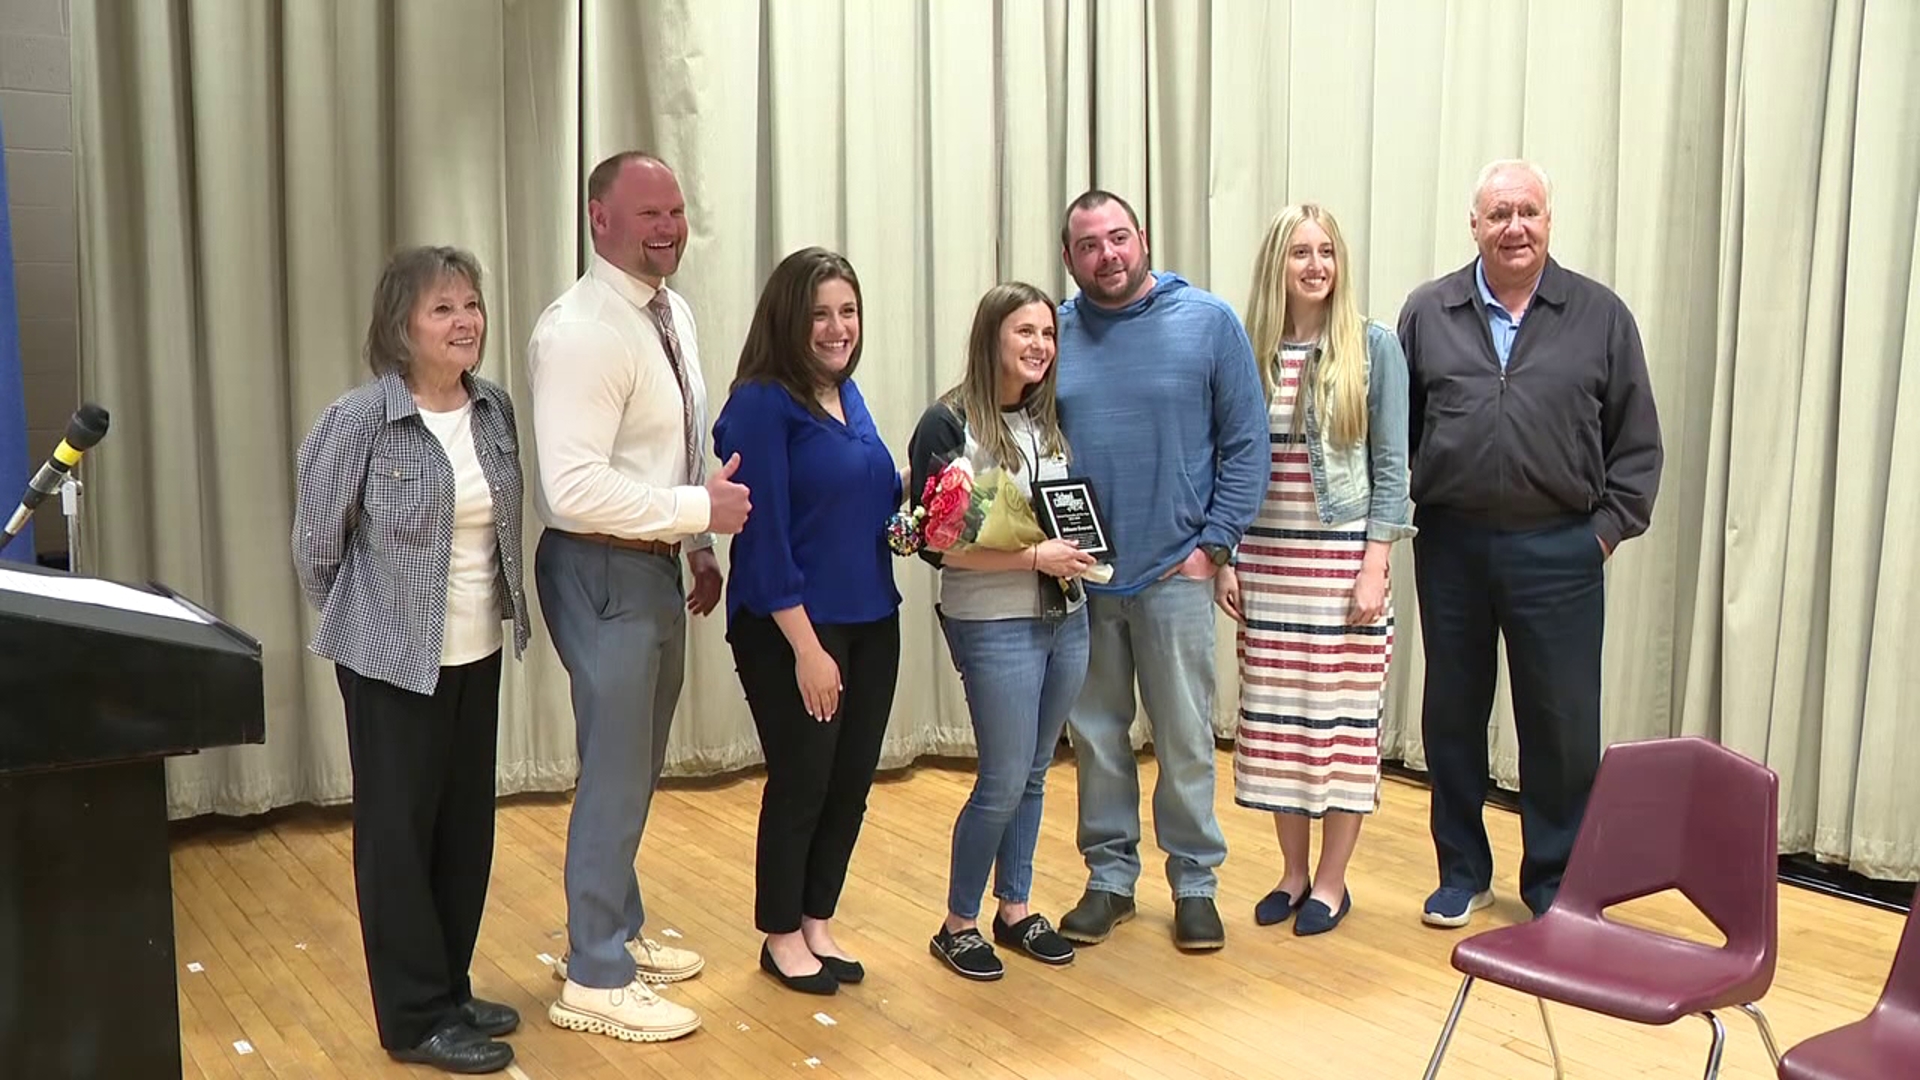 An award given to a school counselor in the Lake-Lehman School District came as a big surprise during a school assembly.